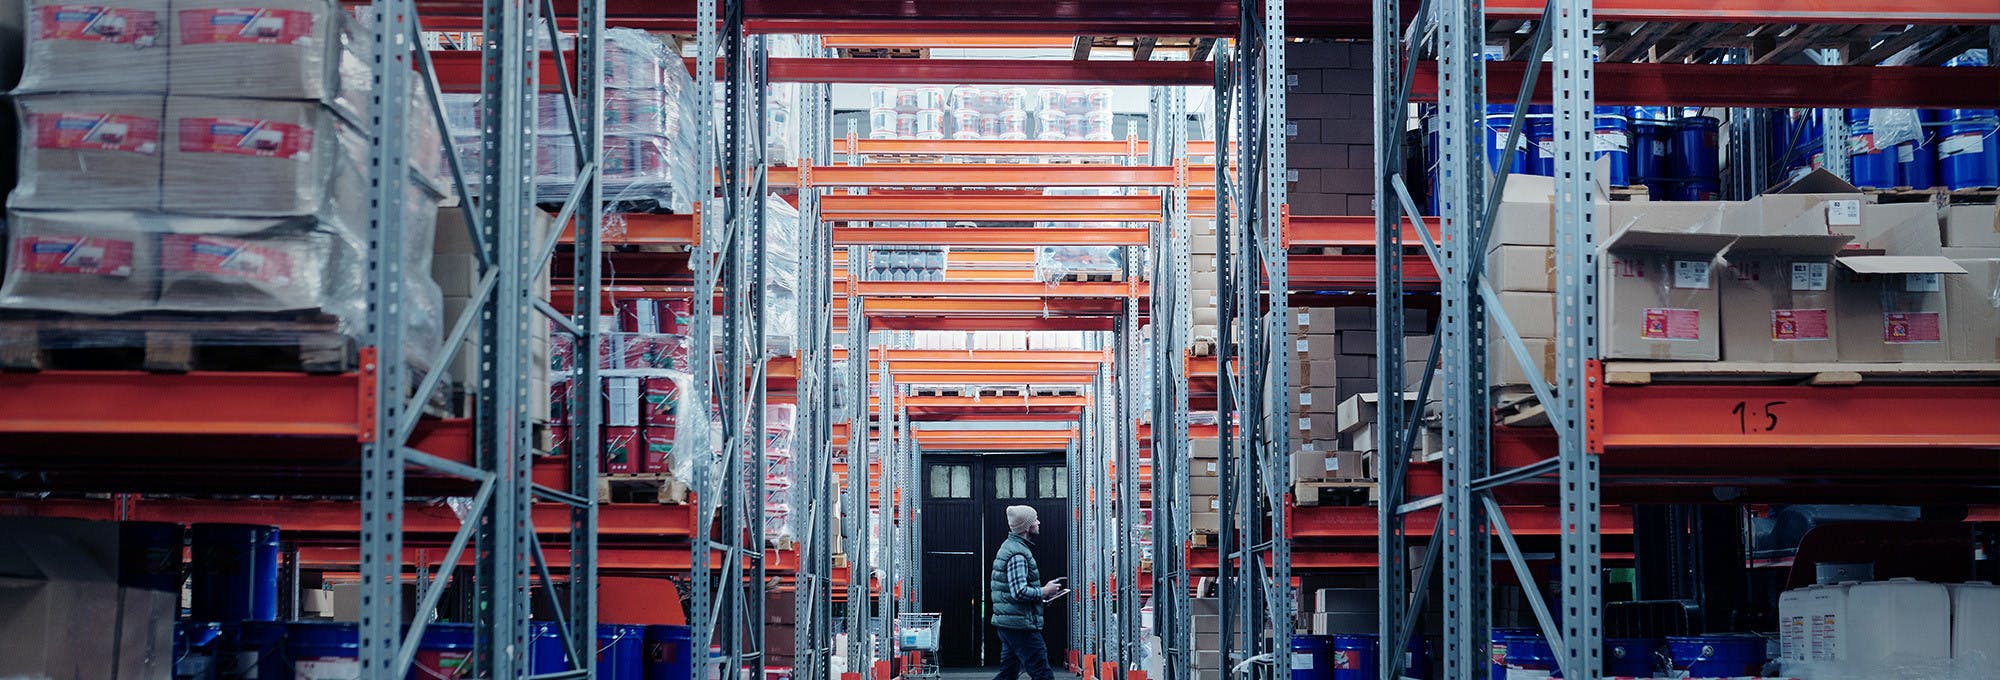 Rows of tall warehouse shelving with company products and a male worker walking through